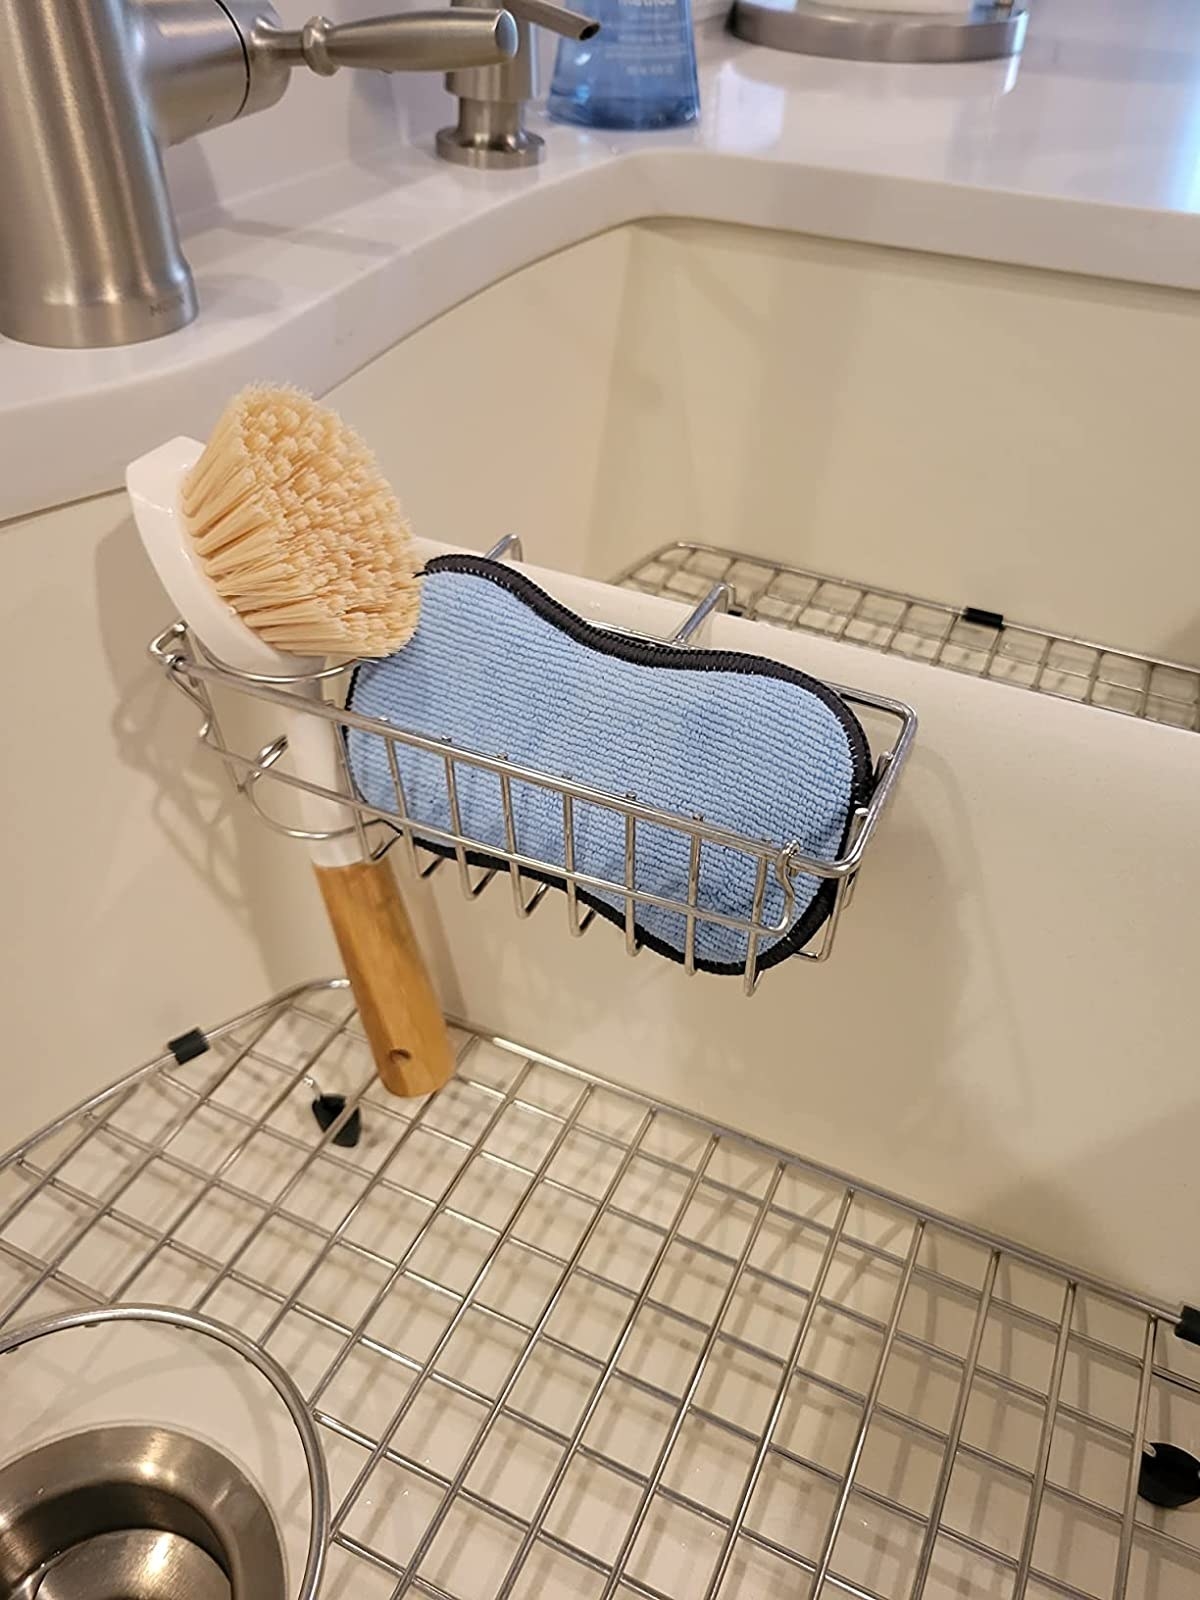 Reviewer image of a sponge and brush in holder over their sink